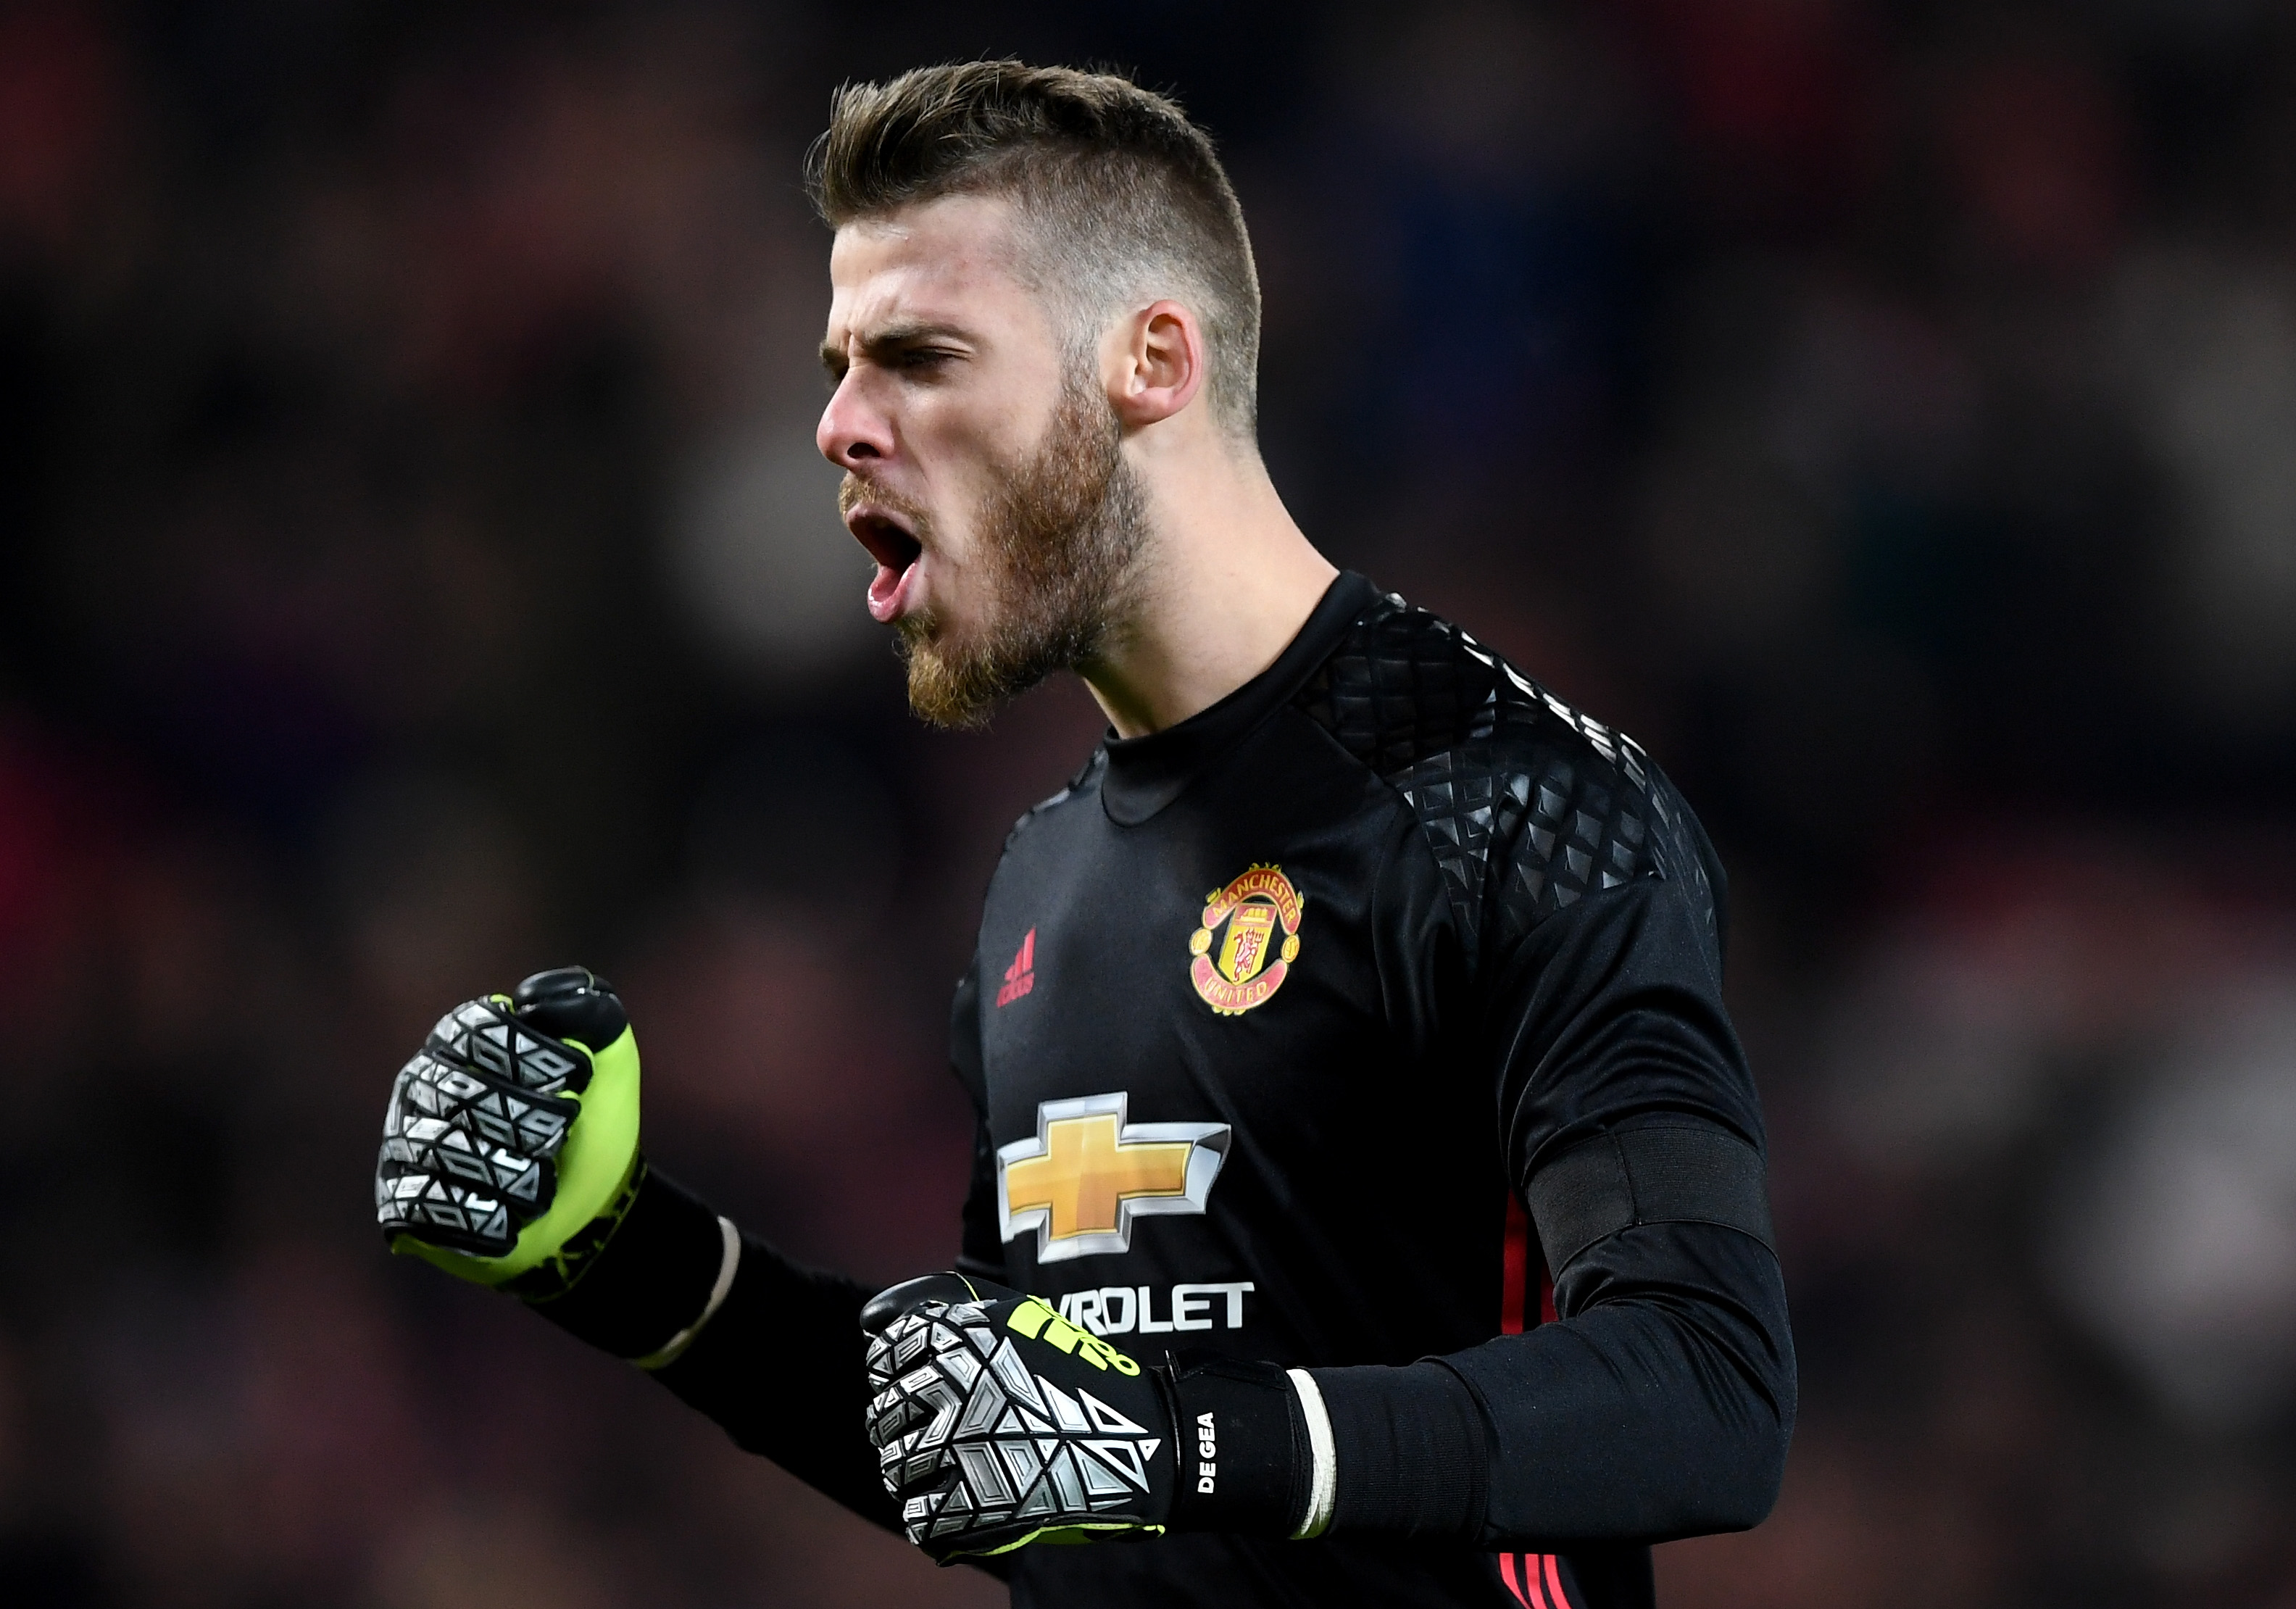 MANCHESTER, ENGLAND - NOVEMBER 30:  David De Gea of Manchester United celebrates after teammate Zlatan Ibrahimovic of Manchester United scores the opening goal during the EFL Cup quarter final match between Manchester United and West Ham United at Old Trafford on November 30, 2016 in Manchester, England.  (Photo by Shaun Botterill/Getty Images)